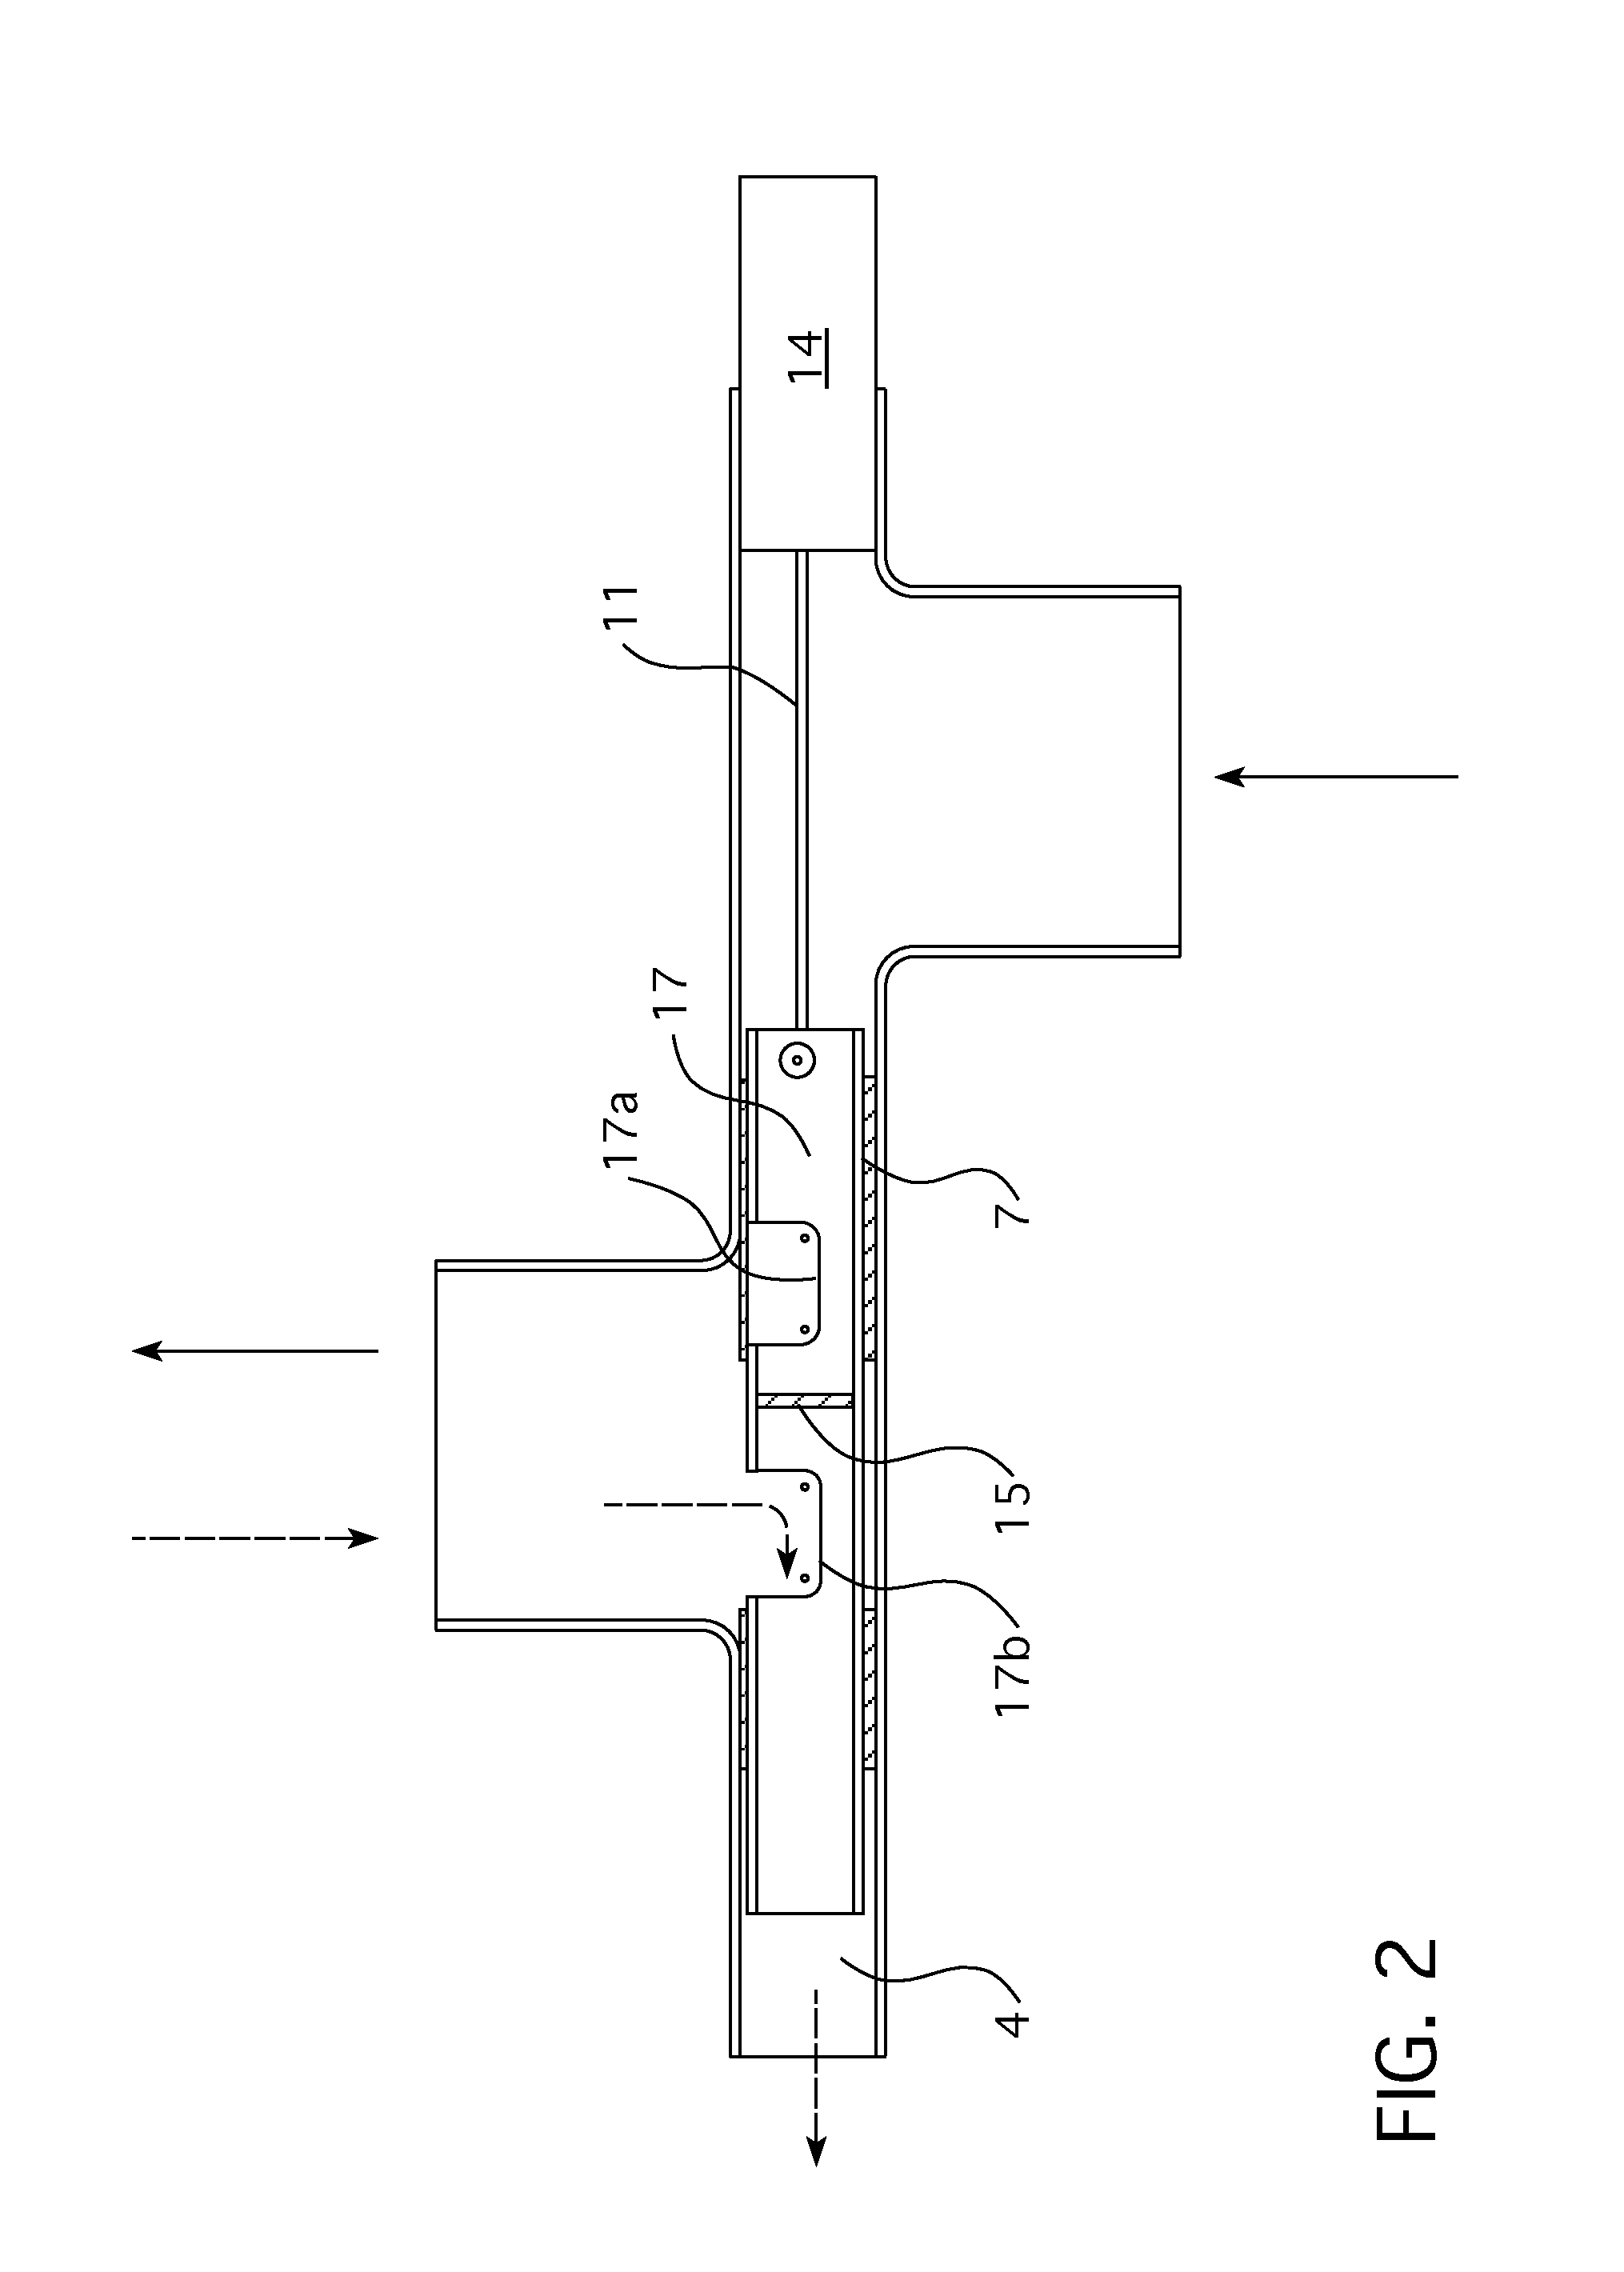 Method and Apparatus for maintaining airway patency and pressure support ventilation